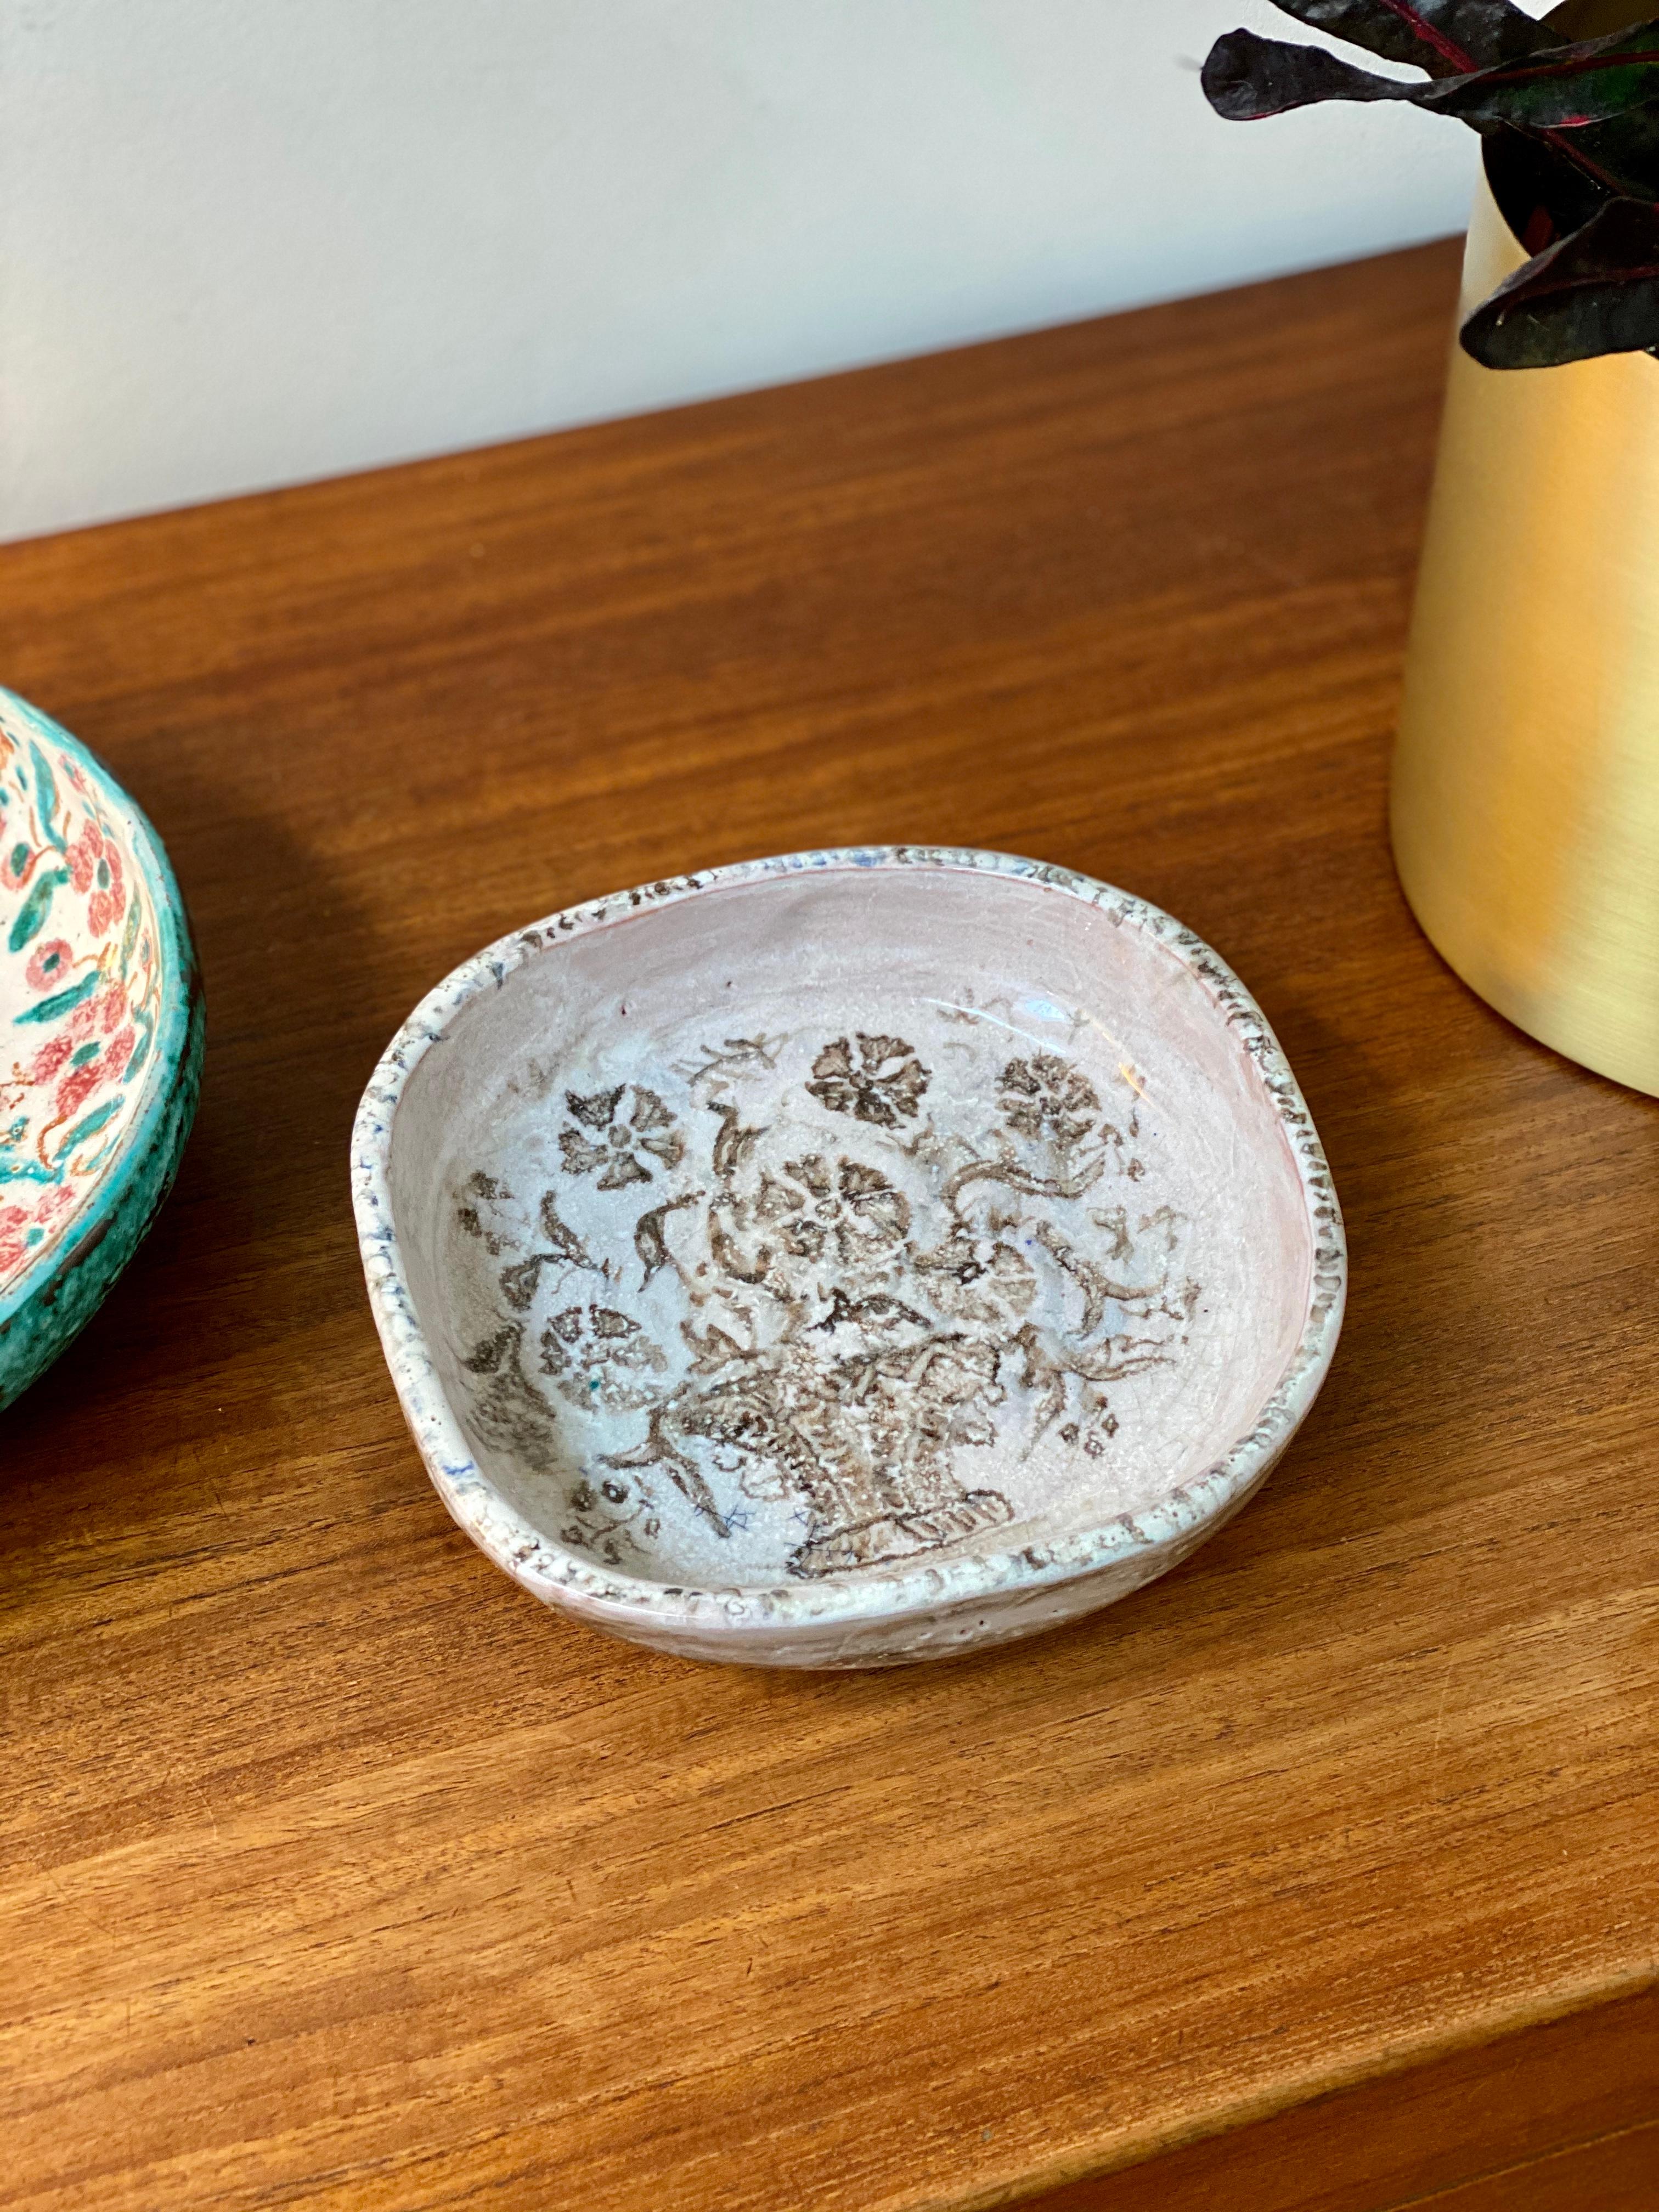 French ceramic bowl by Edouard Cazaux, circa 1930s. Master ceramicist, Édouard Cazaux, was inspired by antiquities, religion and animal life in his creations. This magnificently decorated ceramic dish displays a traditional European vase with a